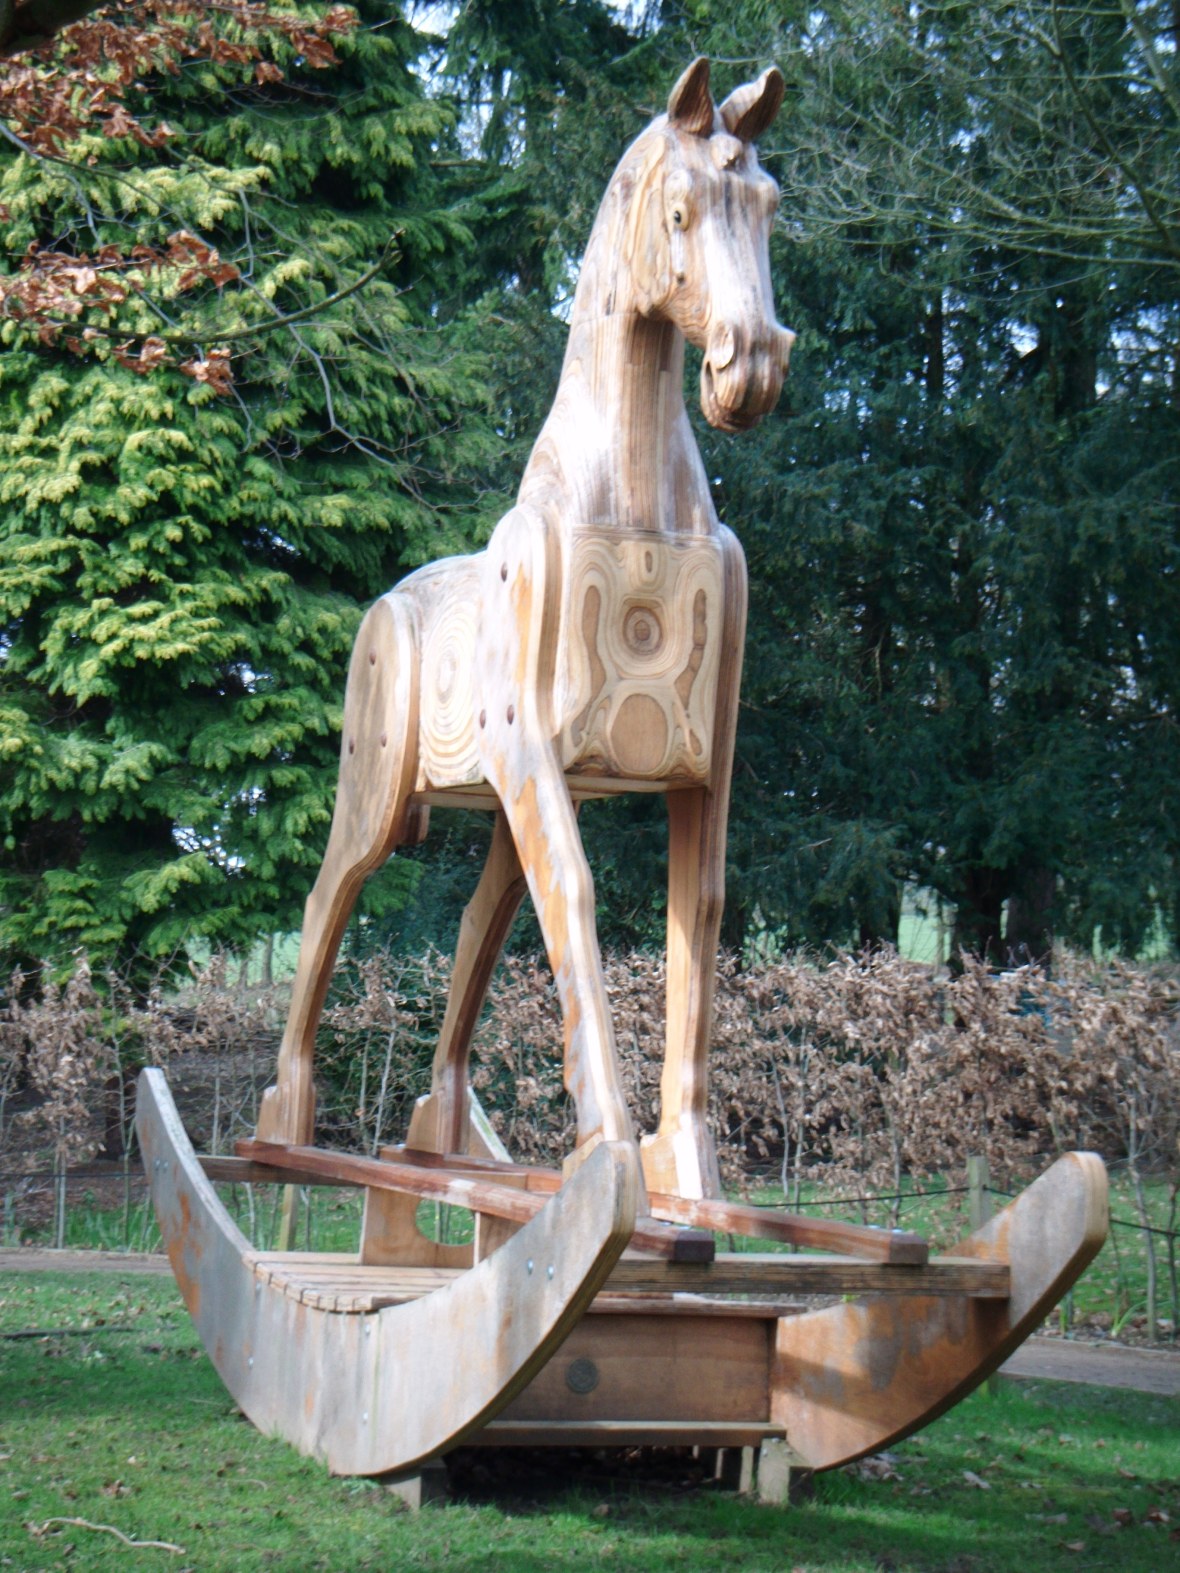 An oversized rockinghorse, a twist on a childhood classic Yorkshire Sculpture Park, UK, March 2014